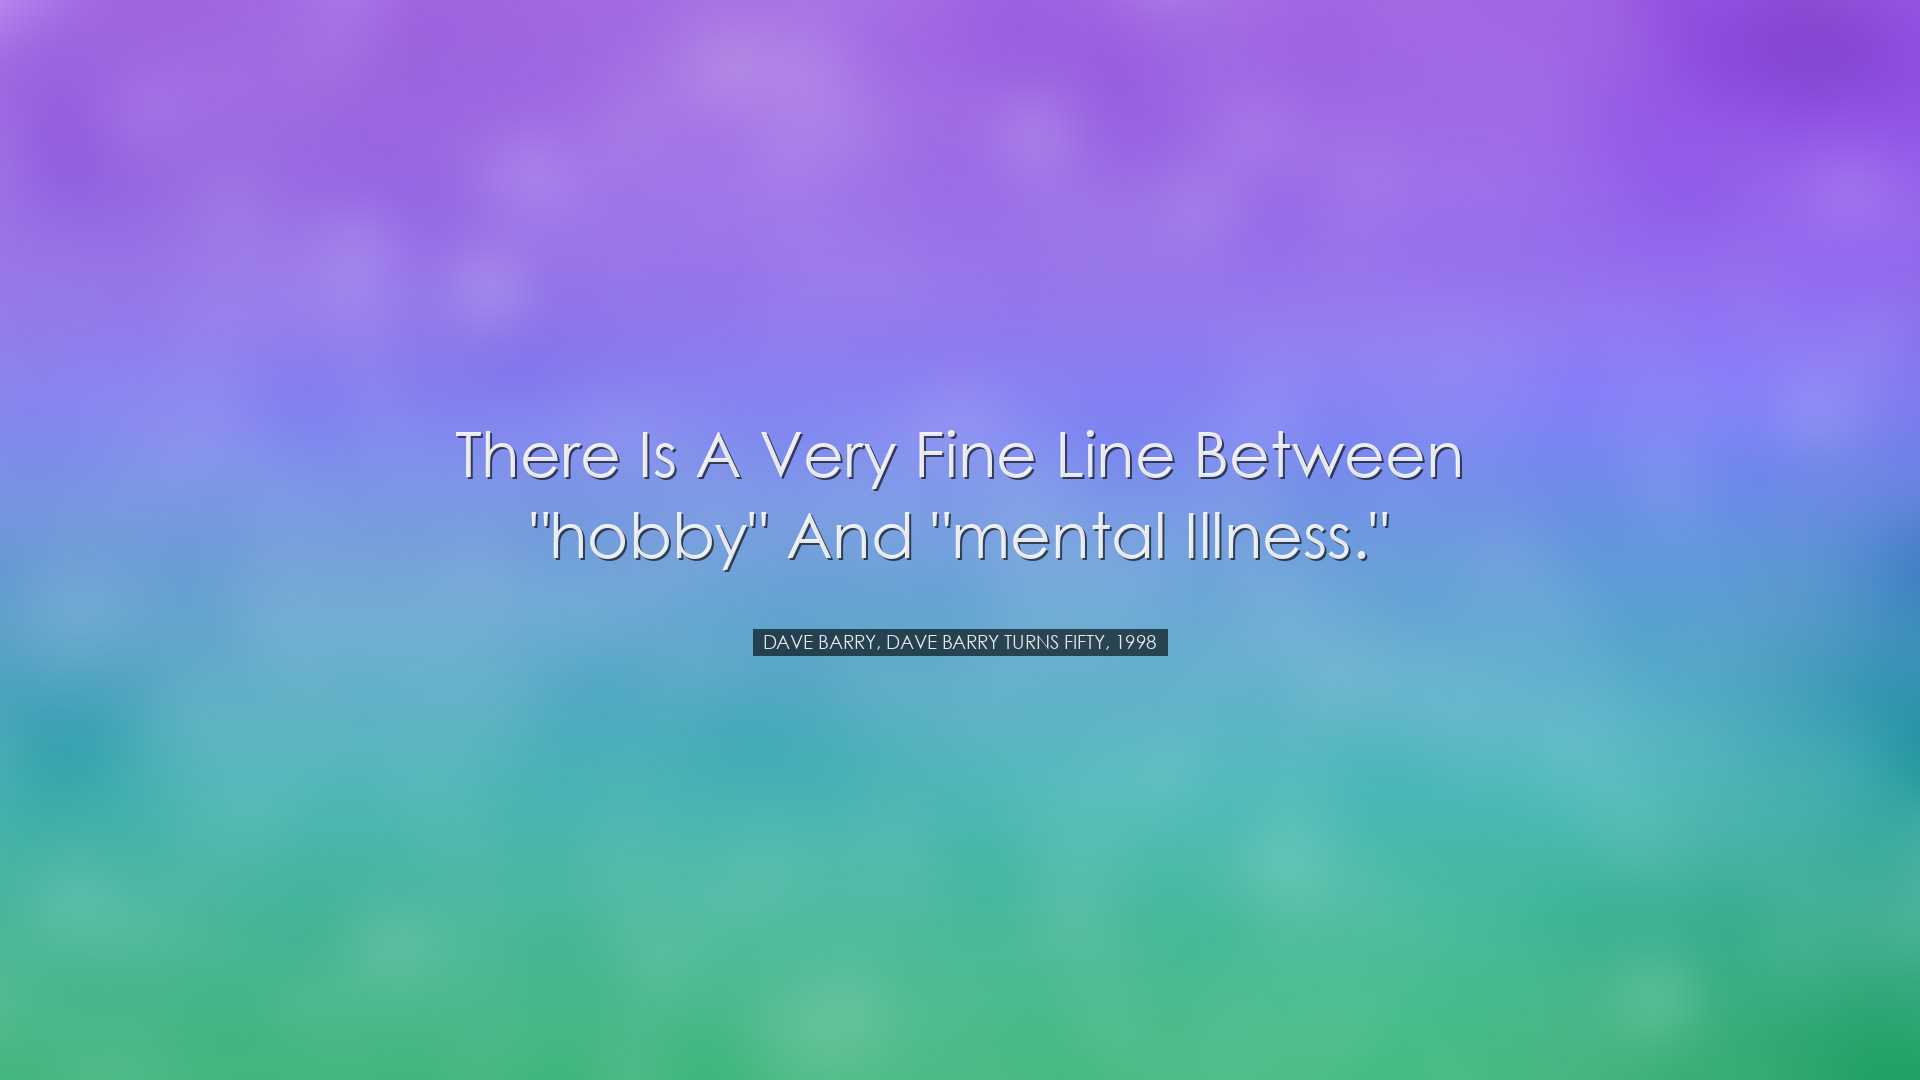 There is a very fine line between 